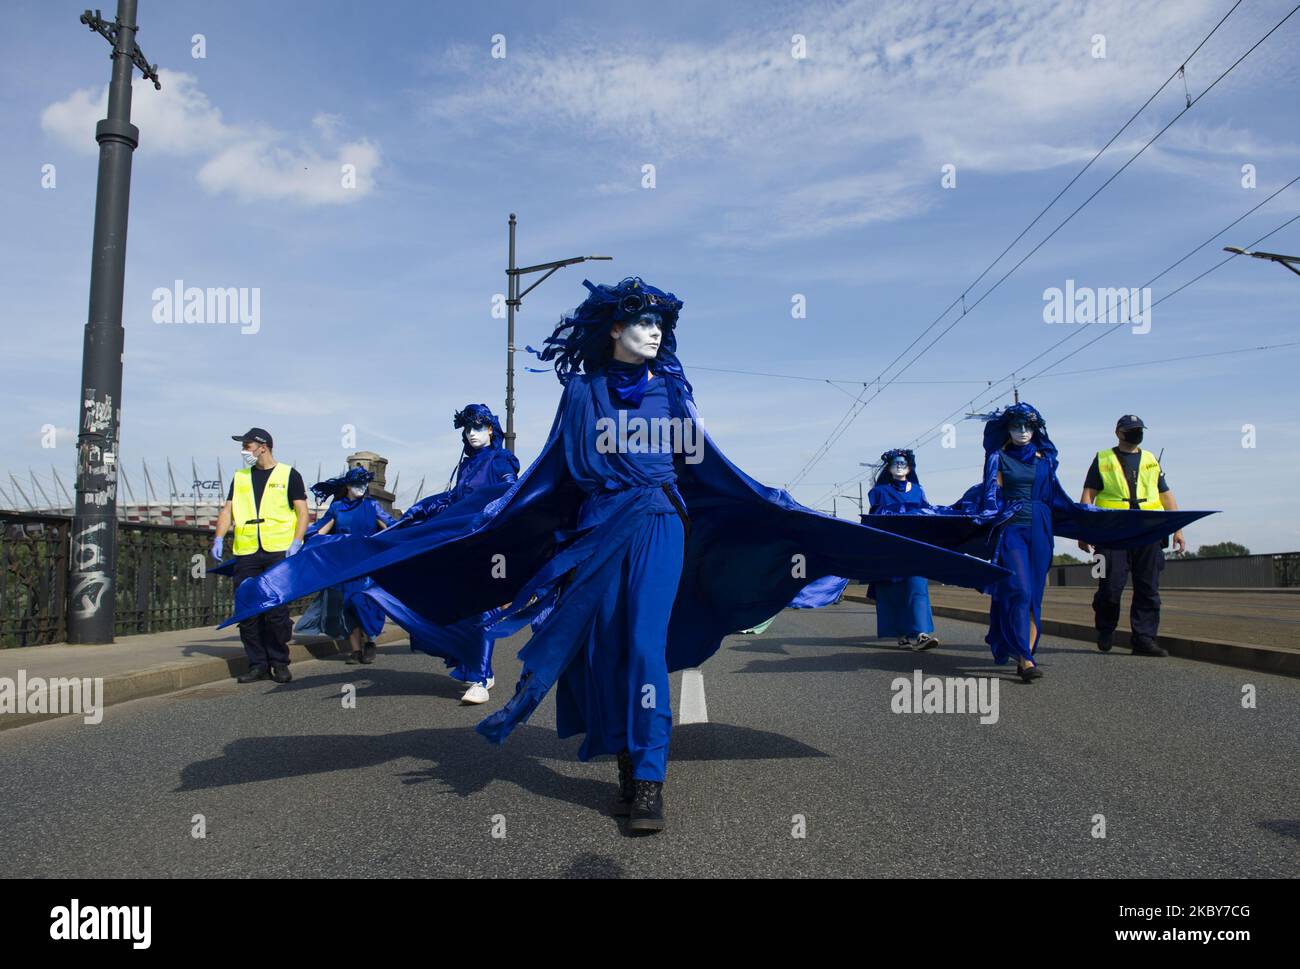 Extinction Rebellion activists dressed in blue gowns take part in the 'wave of sadnesses' during the great march for climate change on September 5, 2020 in Warsaw, Poland. A few thousand people took the streets in the great march for climate organised by Extinction Rebellion as the start of the climate protests season to demand immediate action from the politics and to raise awareness about climate changes. (Photo by Aleksander Kalka/NurPhoto) Stock Photo